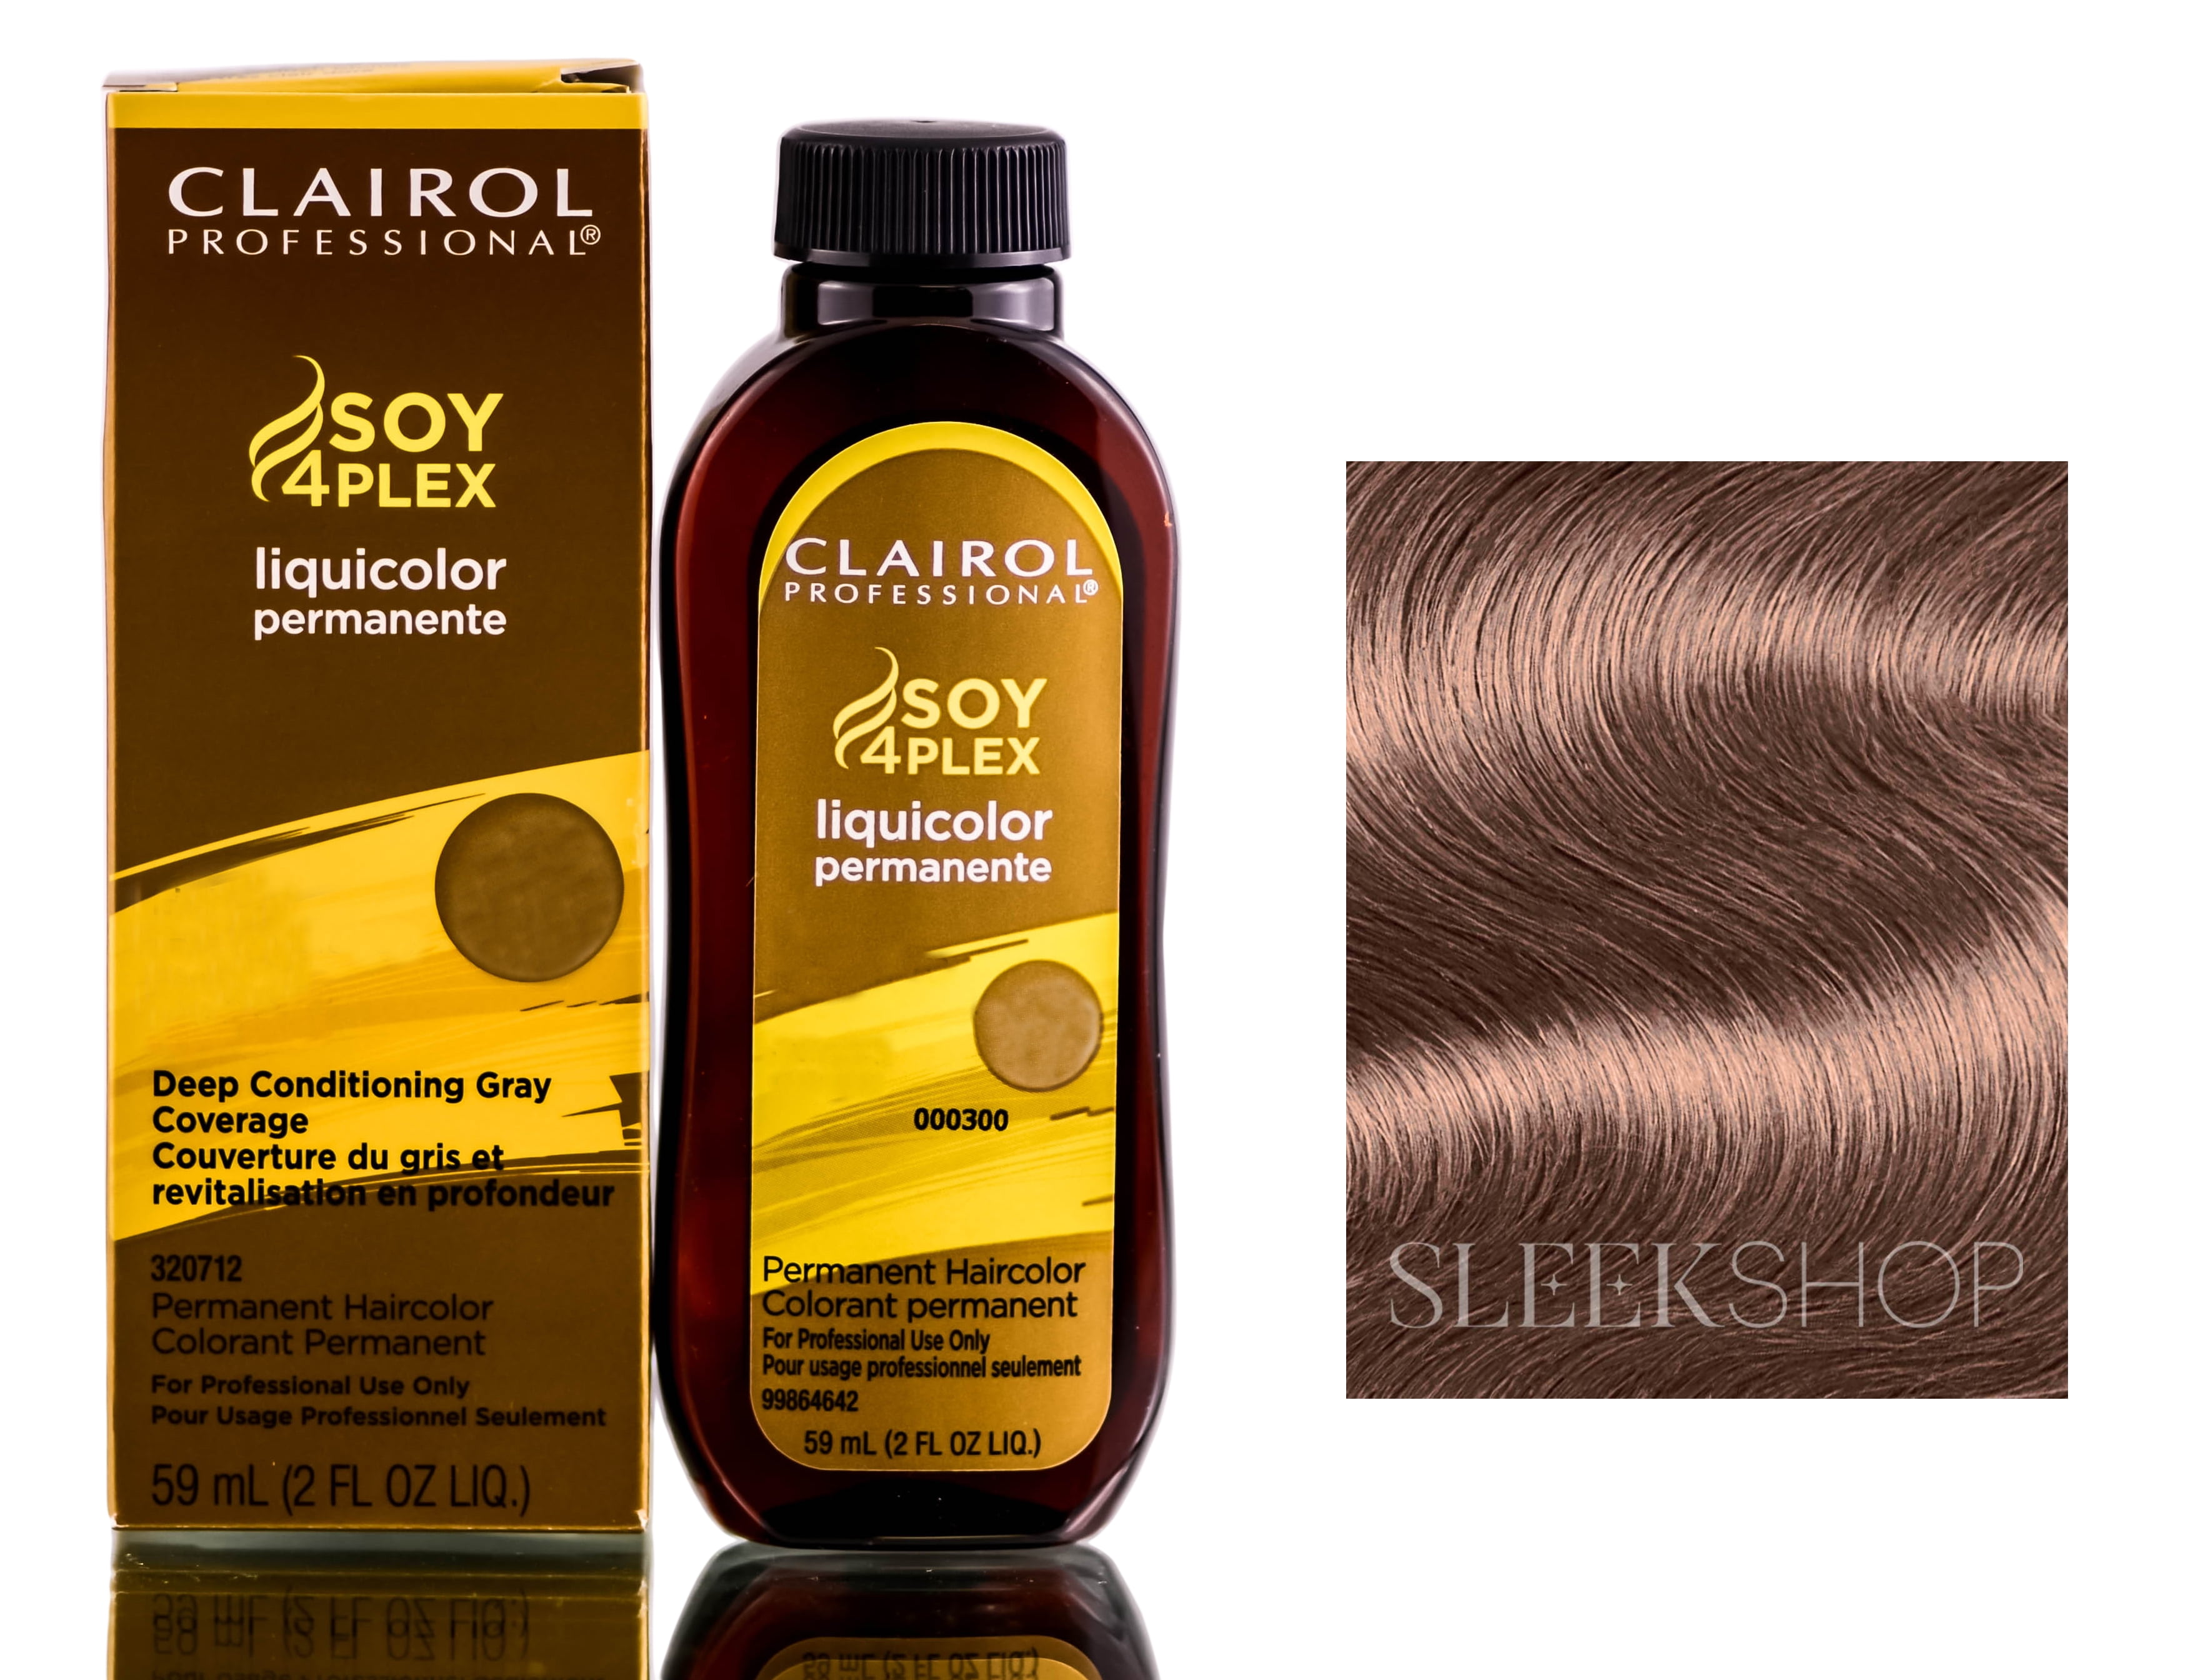 8. Clairol Professional Soy4Plex Liquicolor Permanent Hair Color, 9AA/20D Very Light Ultra Cool Blonde - wide 9